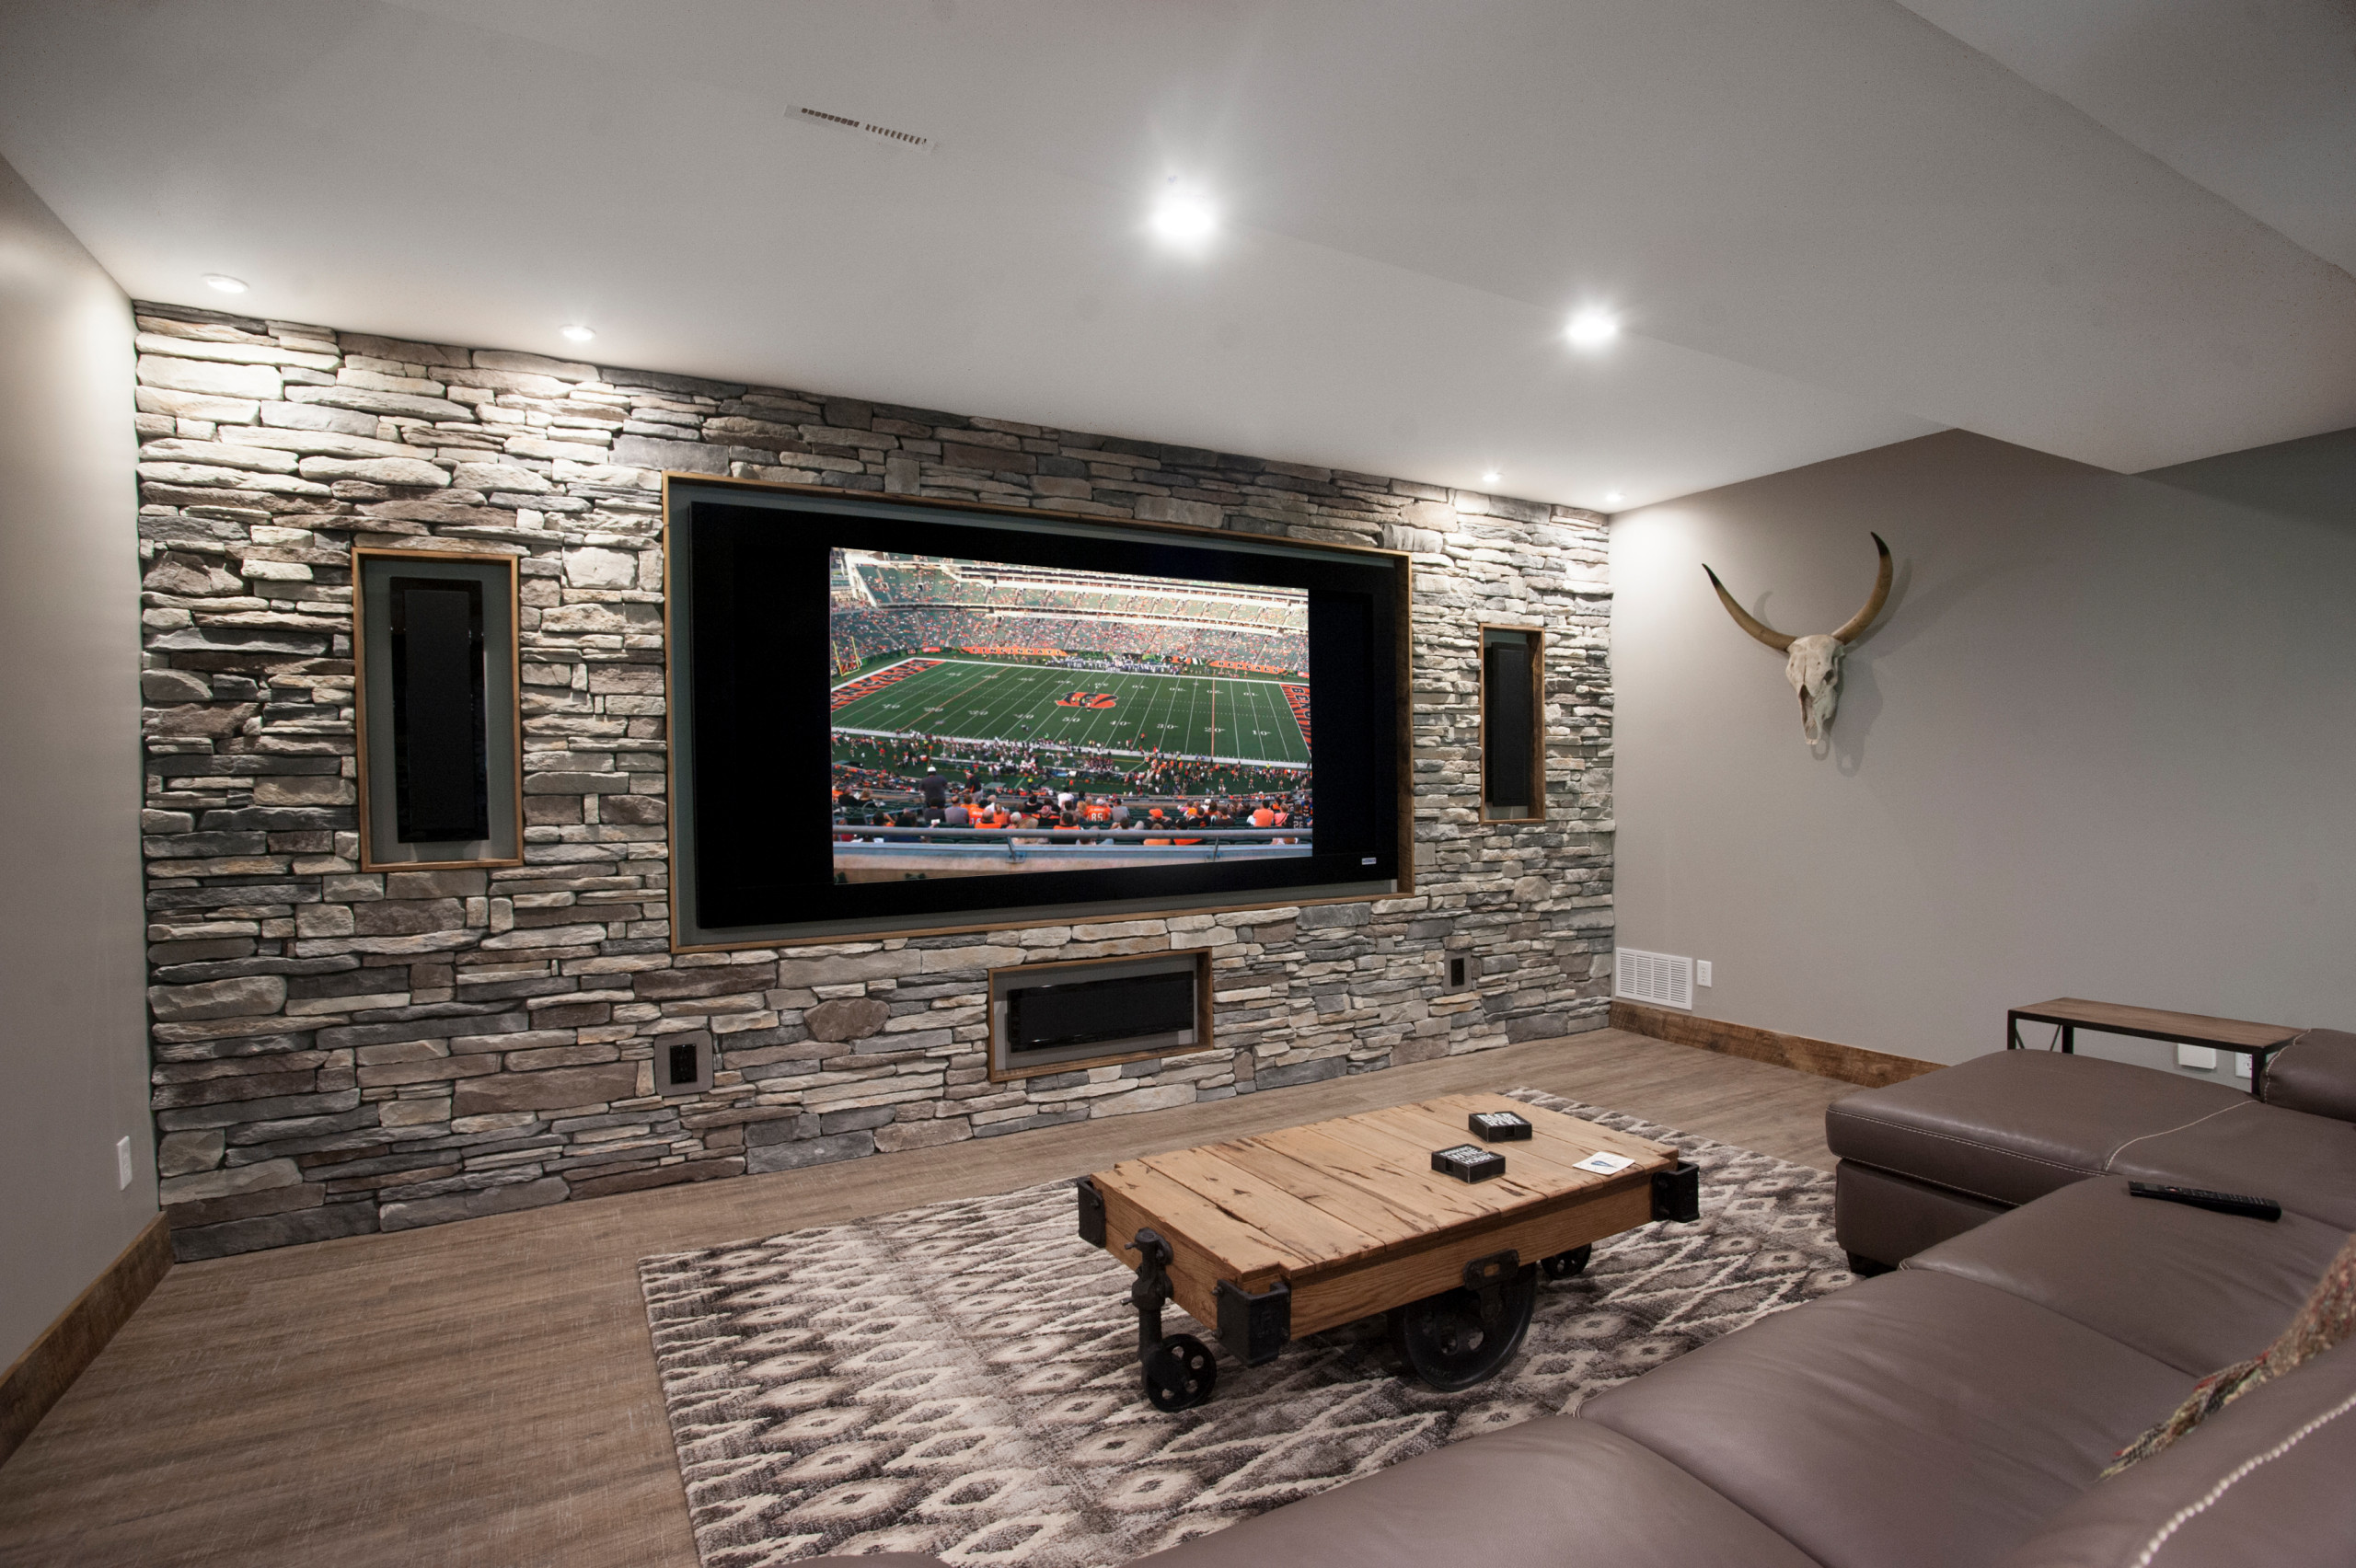 75 Beautiful Rustic Basement Pictures Ideas May 2021 Houzz